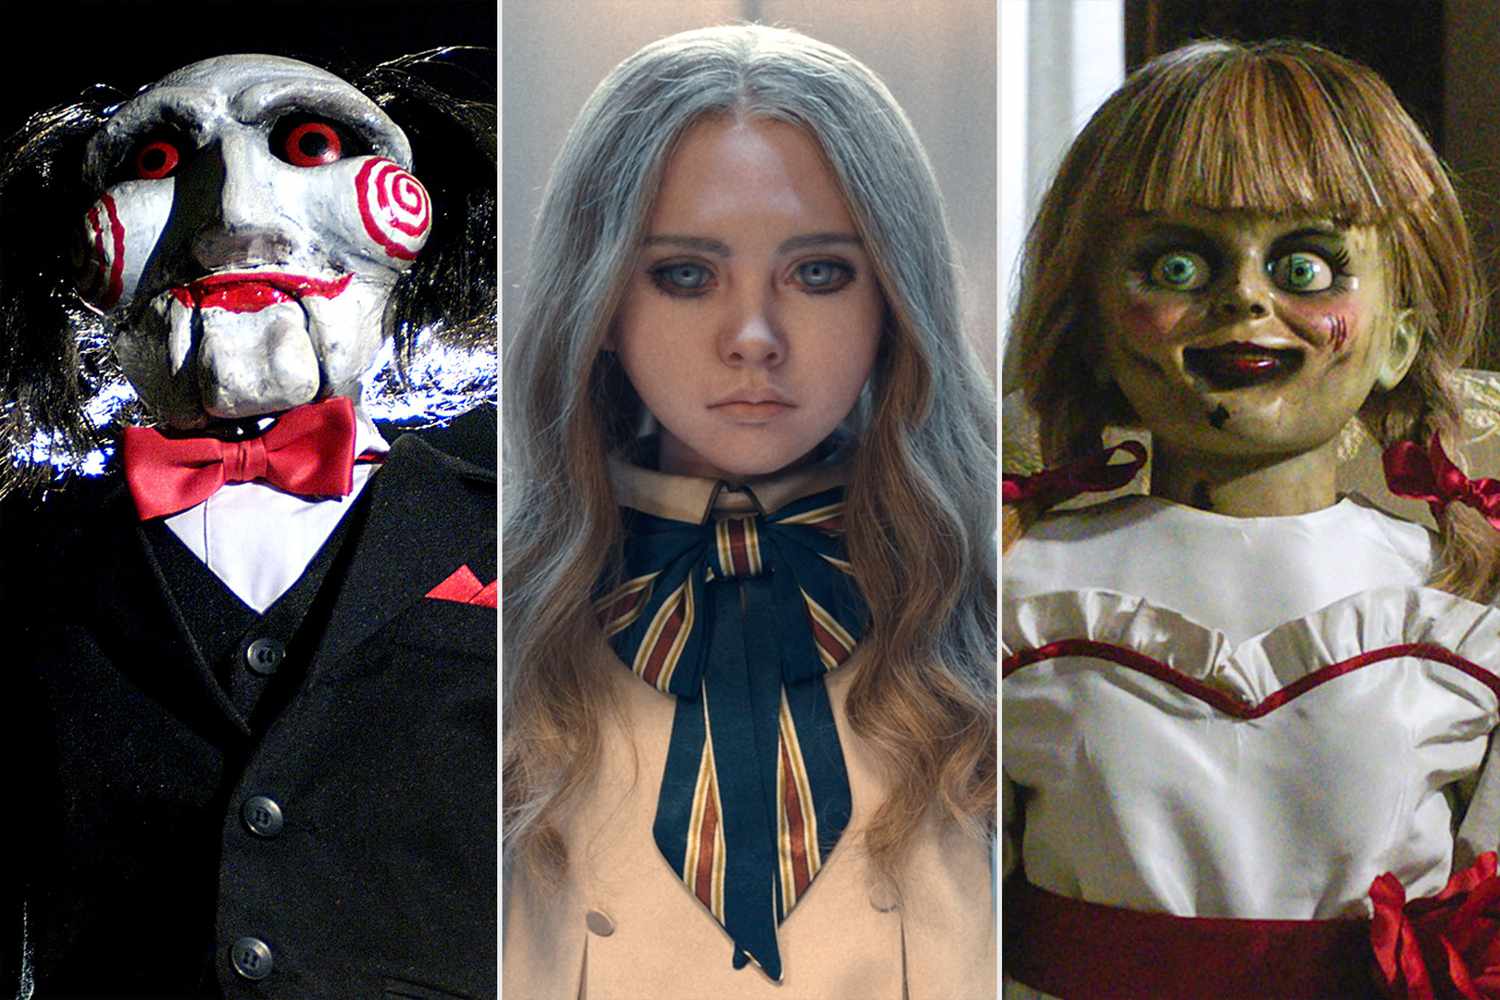 ‘M3GAN’ producer James Wan explains his obsession with killer dolls